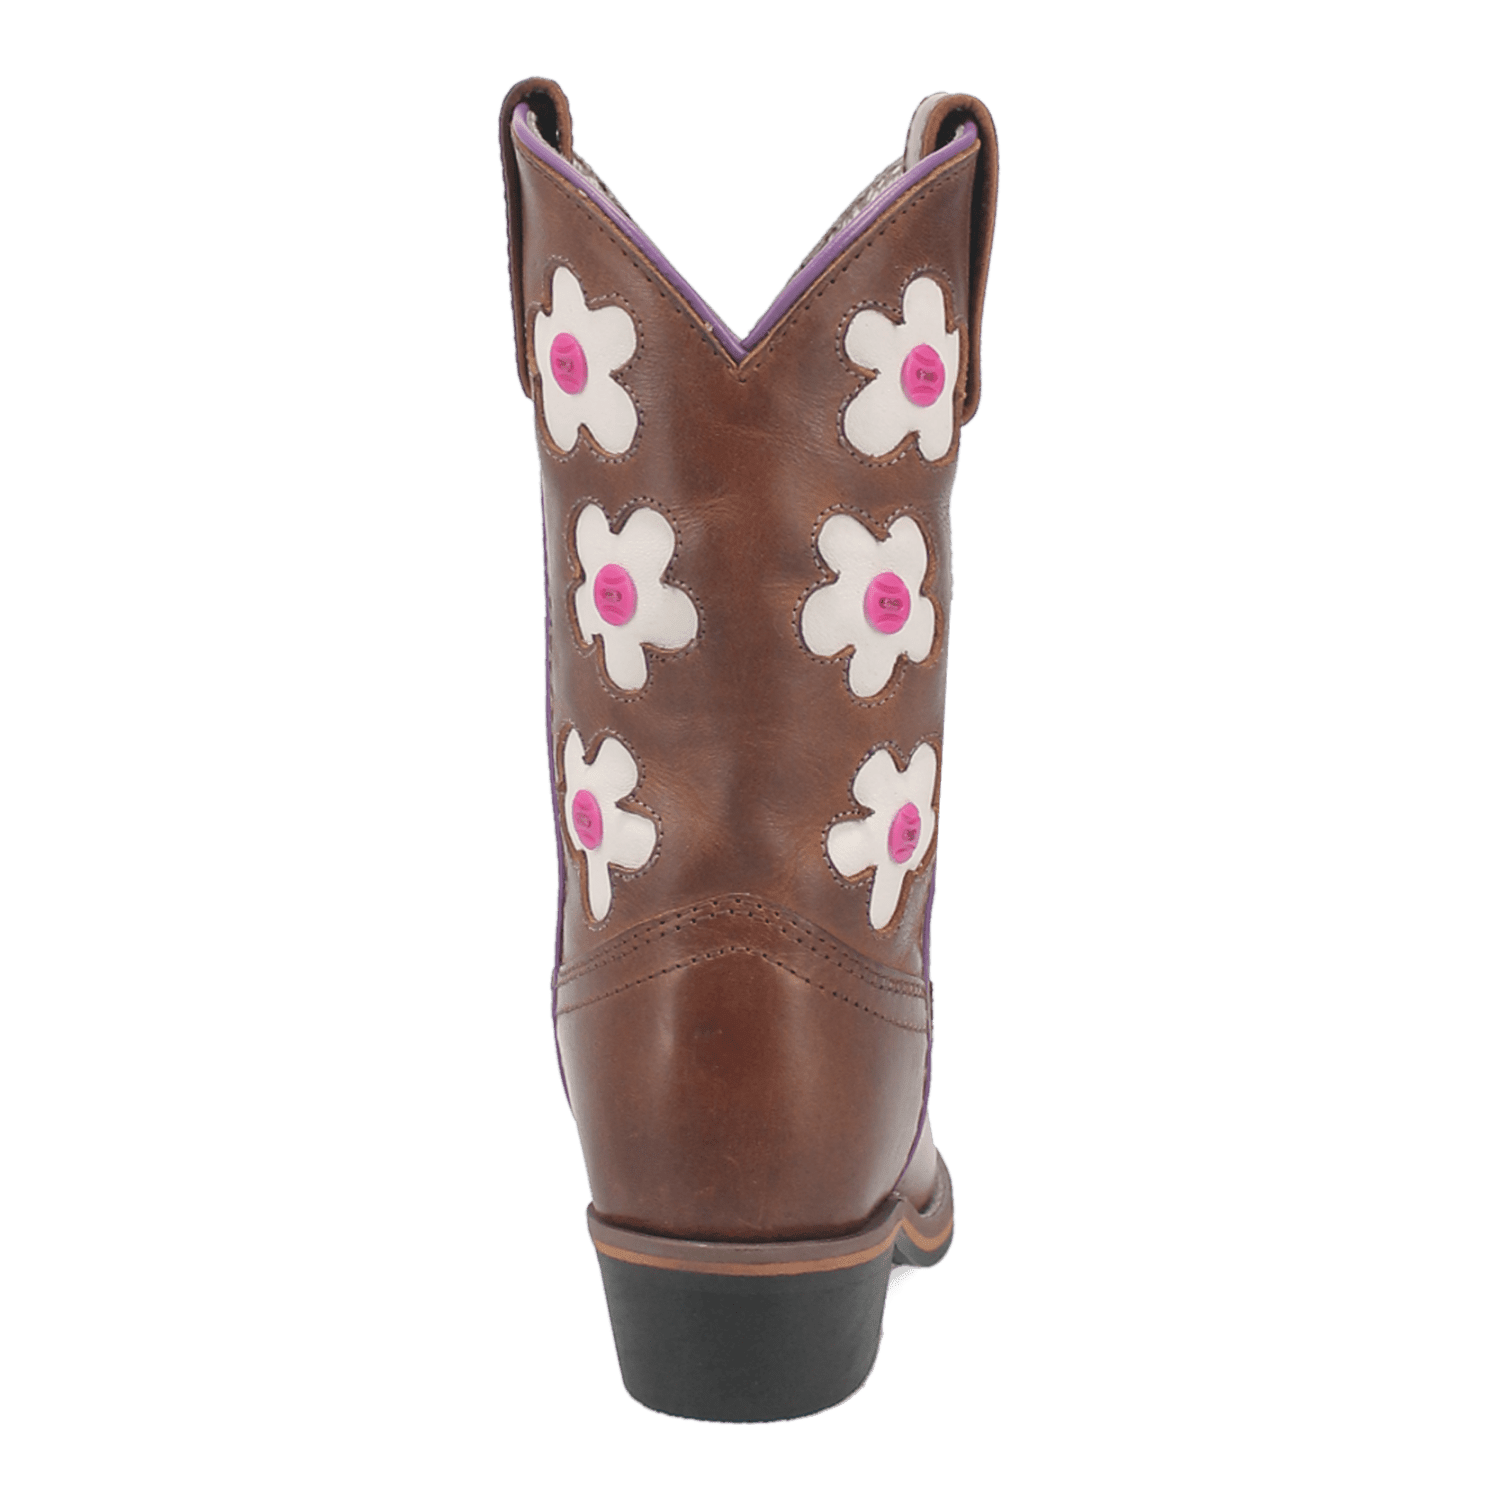 GISELLE COLOR CHANGING LEATHER CHILDREN'S BOOT Image